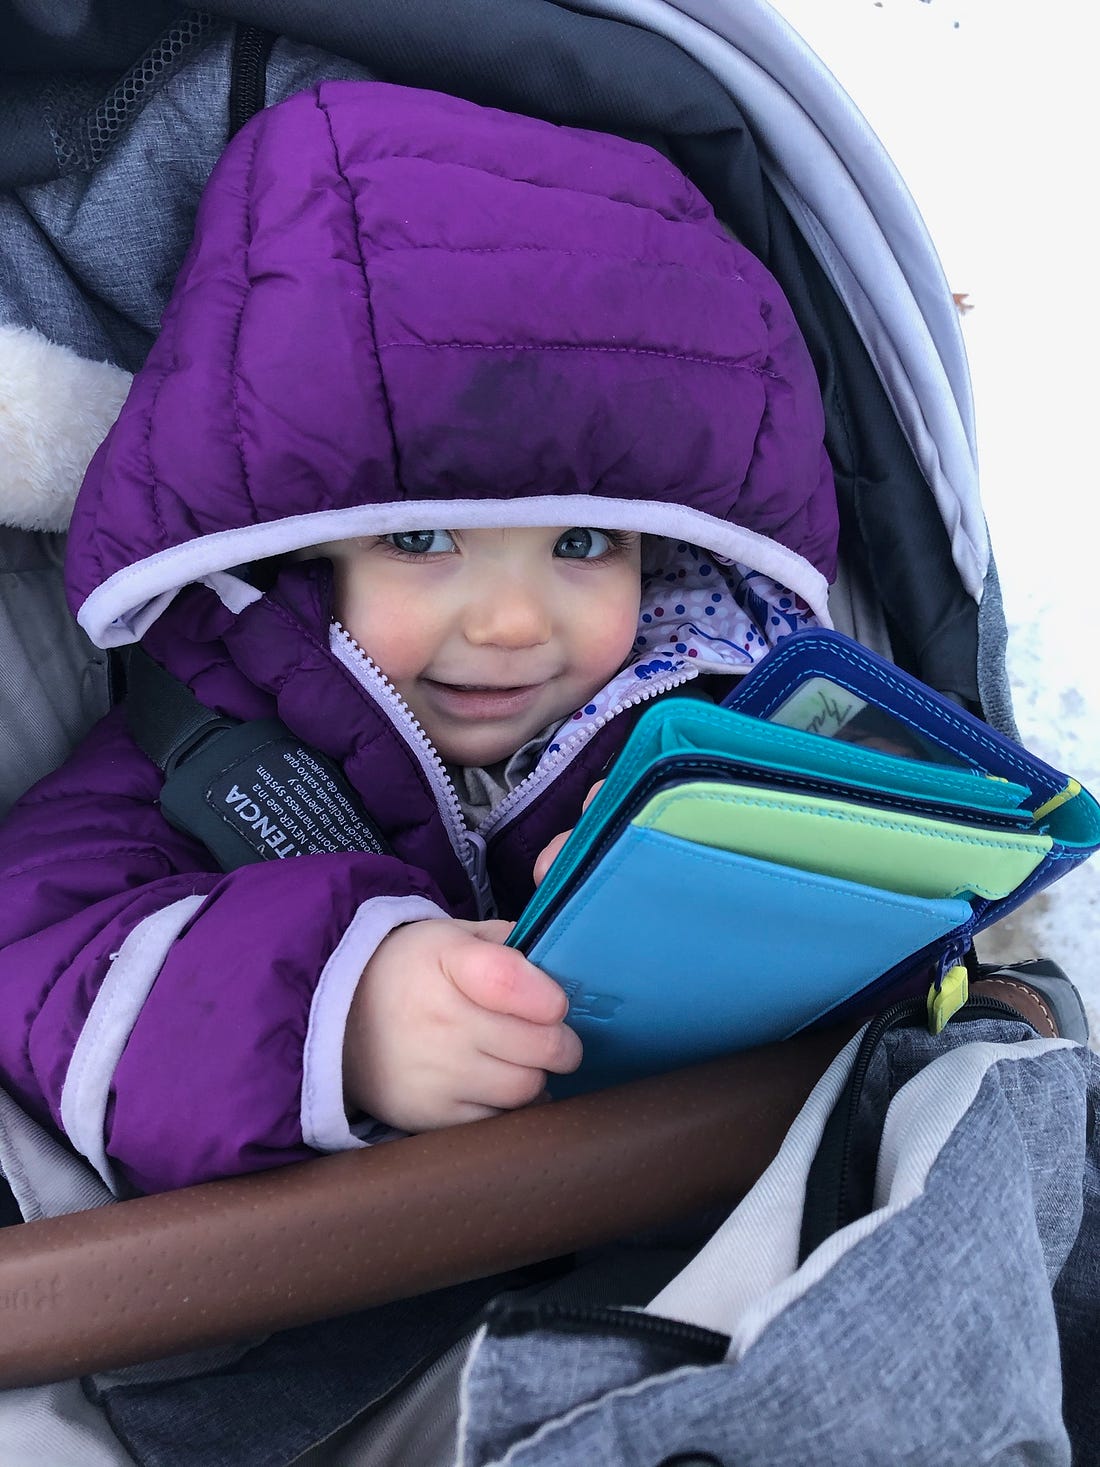 A cute baby in a stroller wearing a snowsuit holding a wallet and smiling